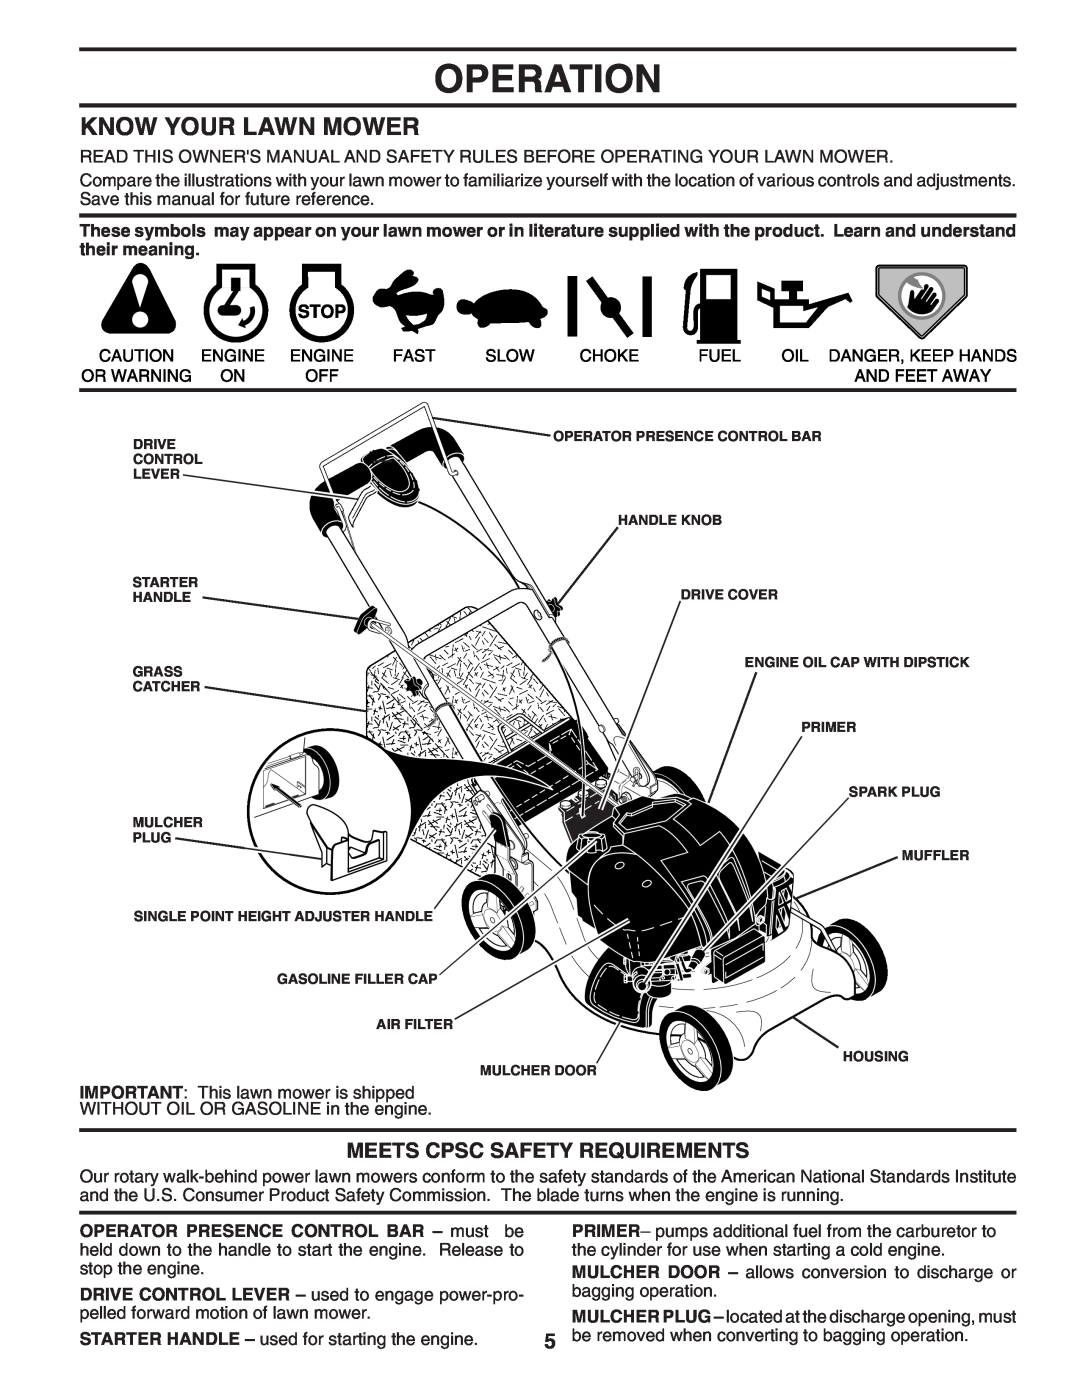 Husqvarna 87521RSX owner manual Operation, Know Your Lawn Mower, Meets Cpsc Safety Requirements 